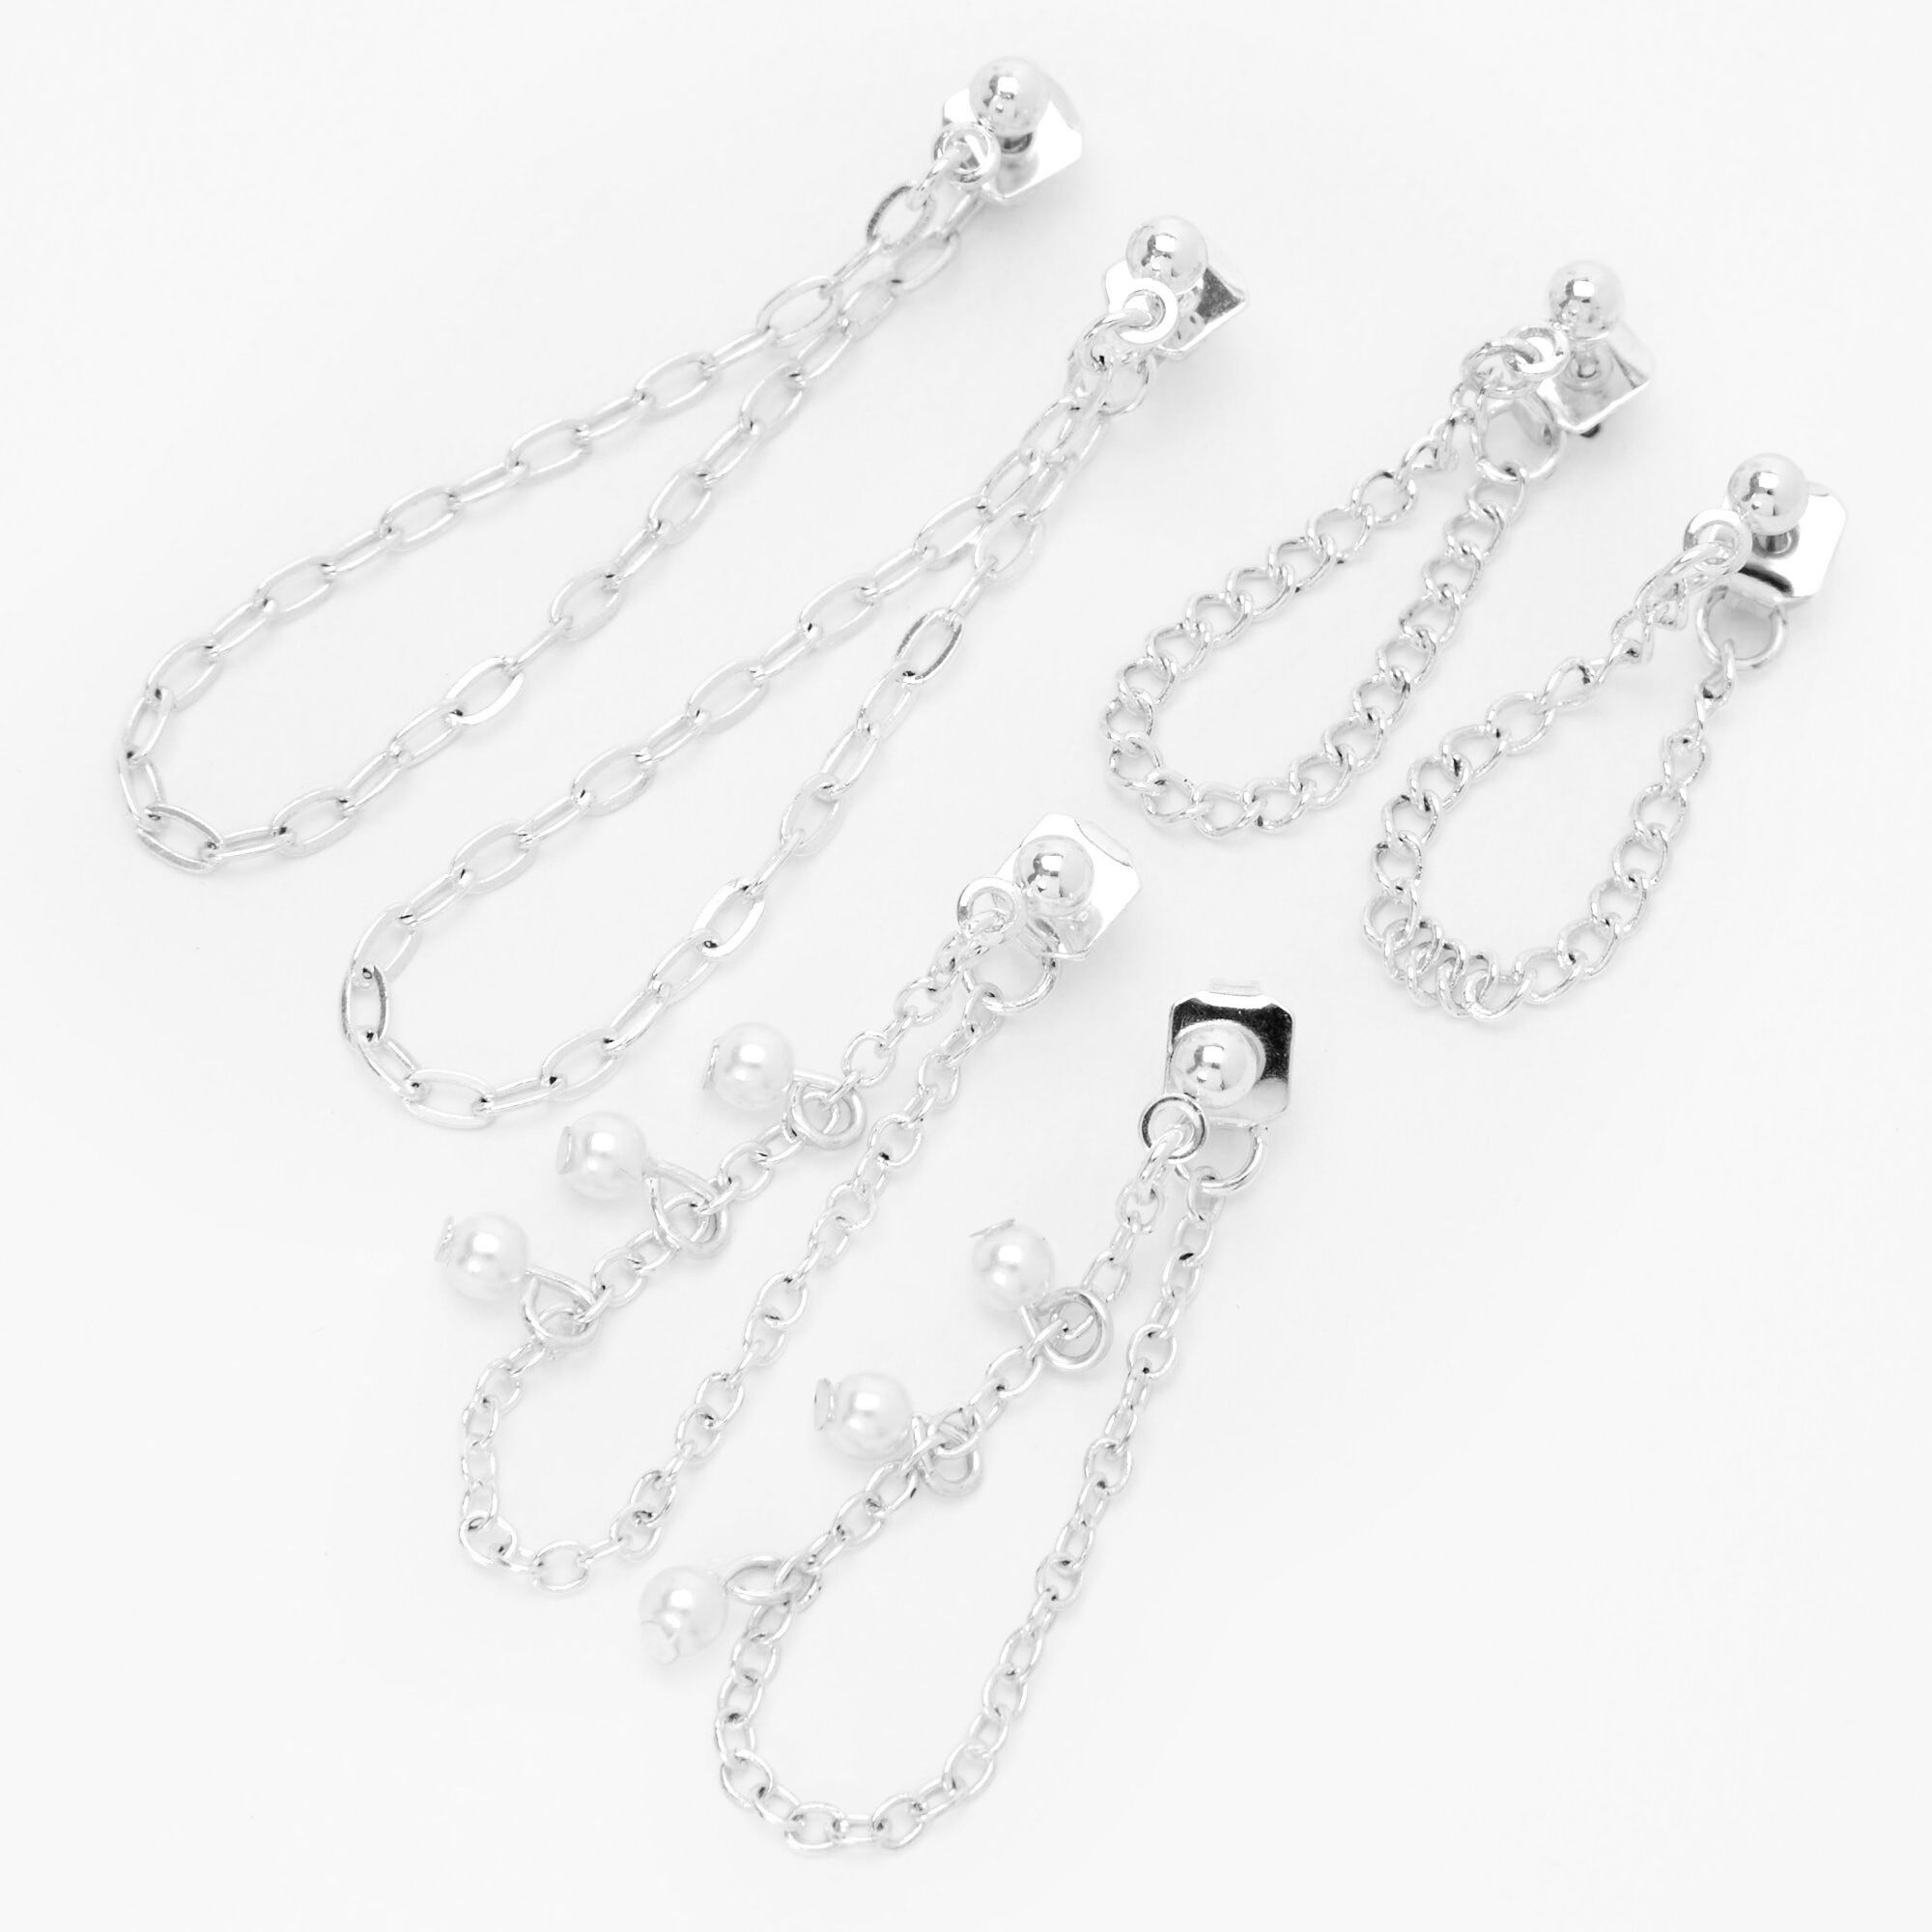 Fashion Body Jewelry  tear drops with rhinestones and swiggle chains in Silver 